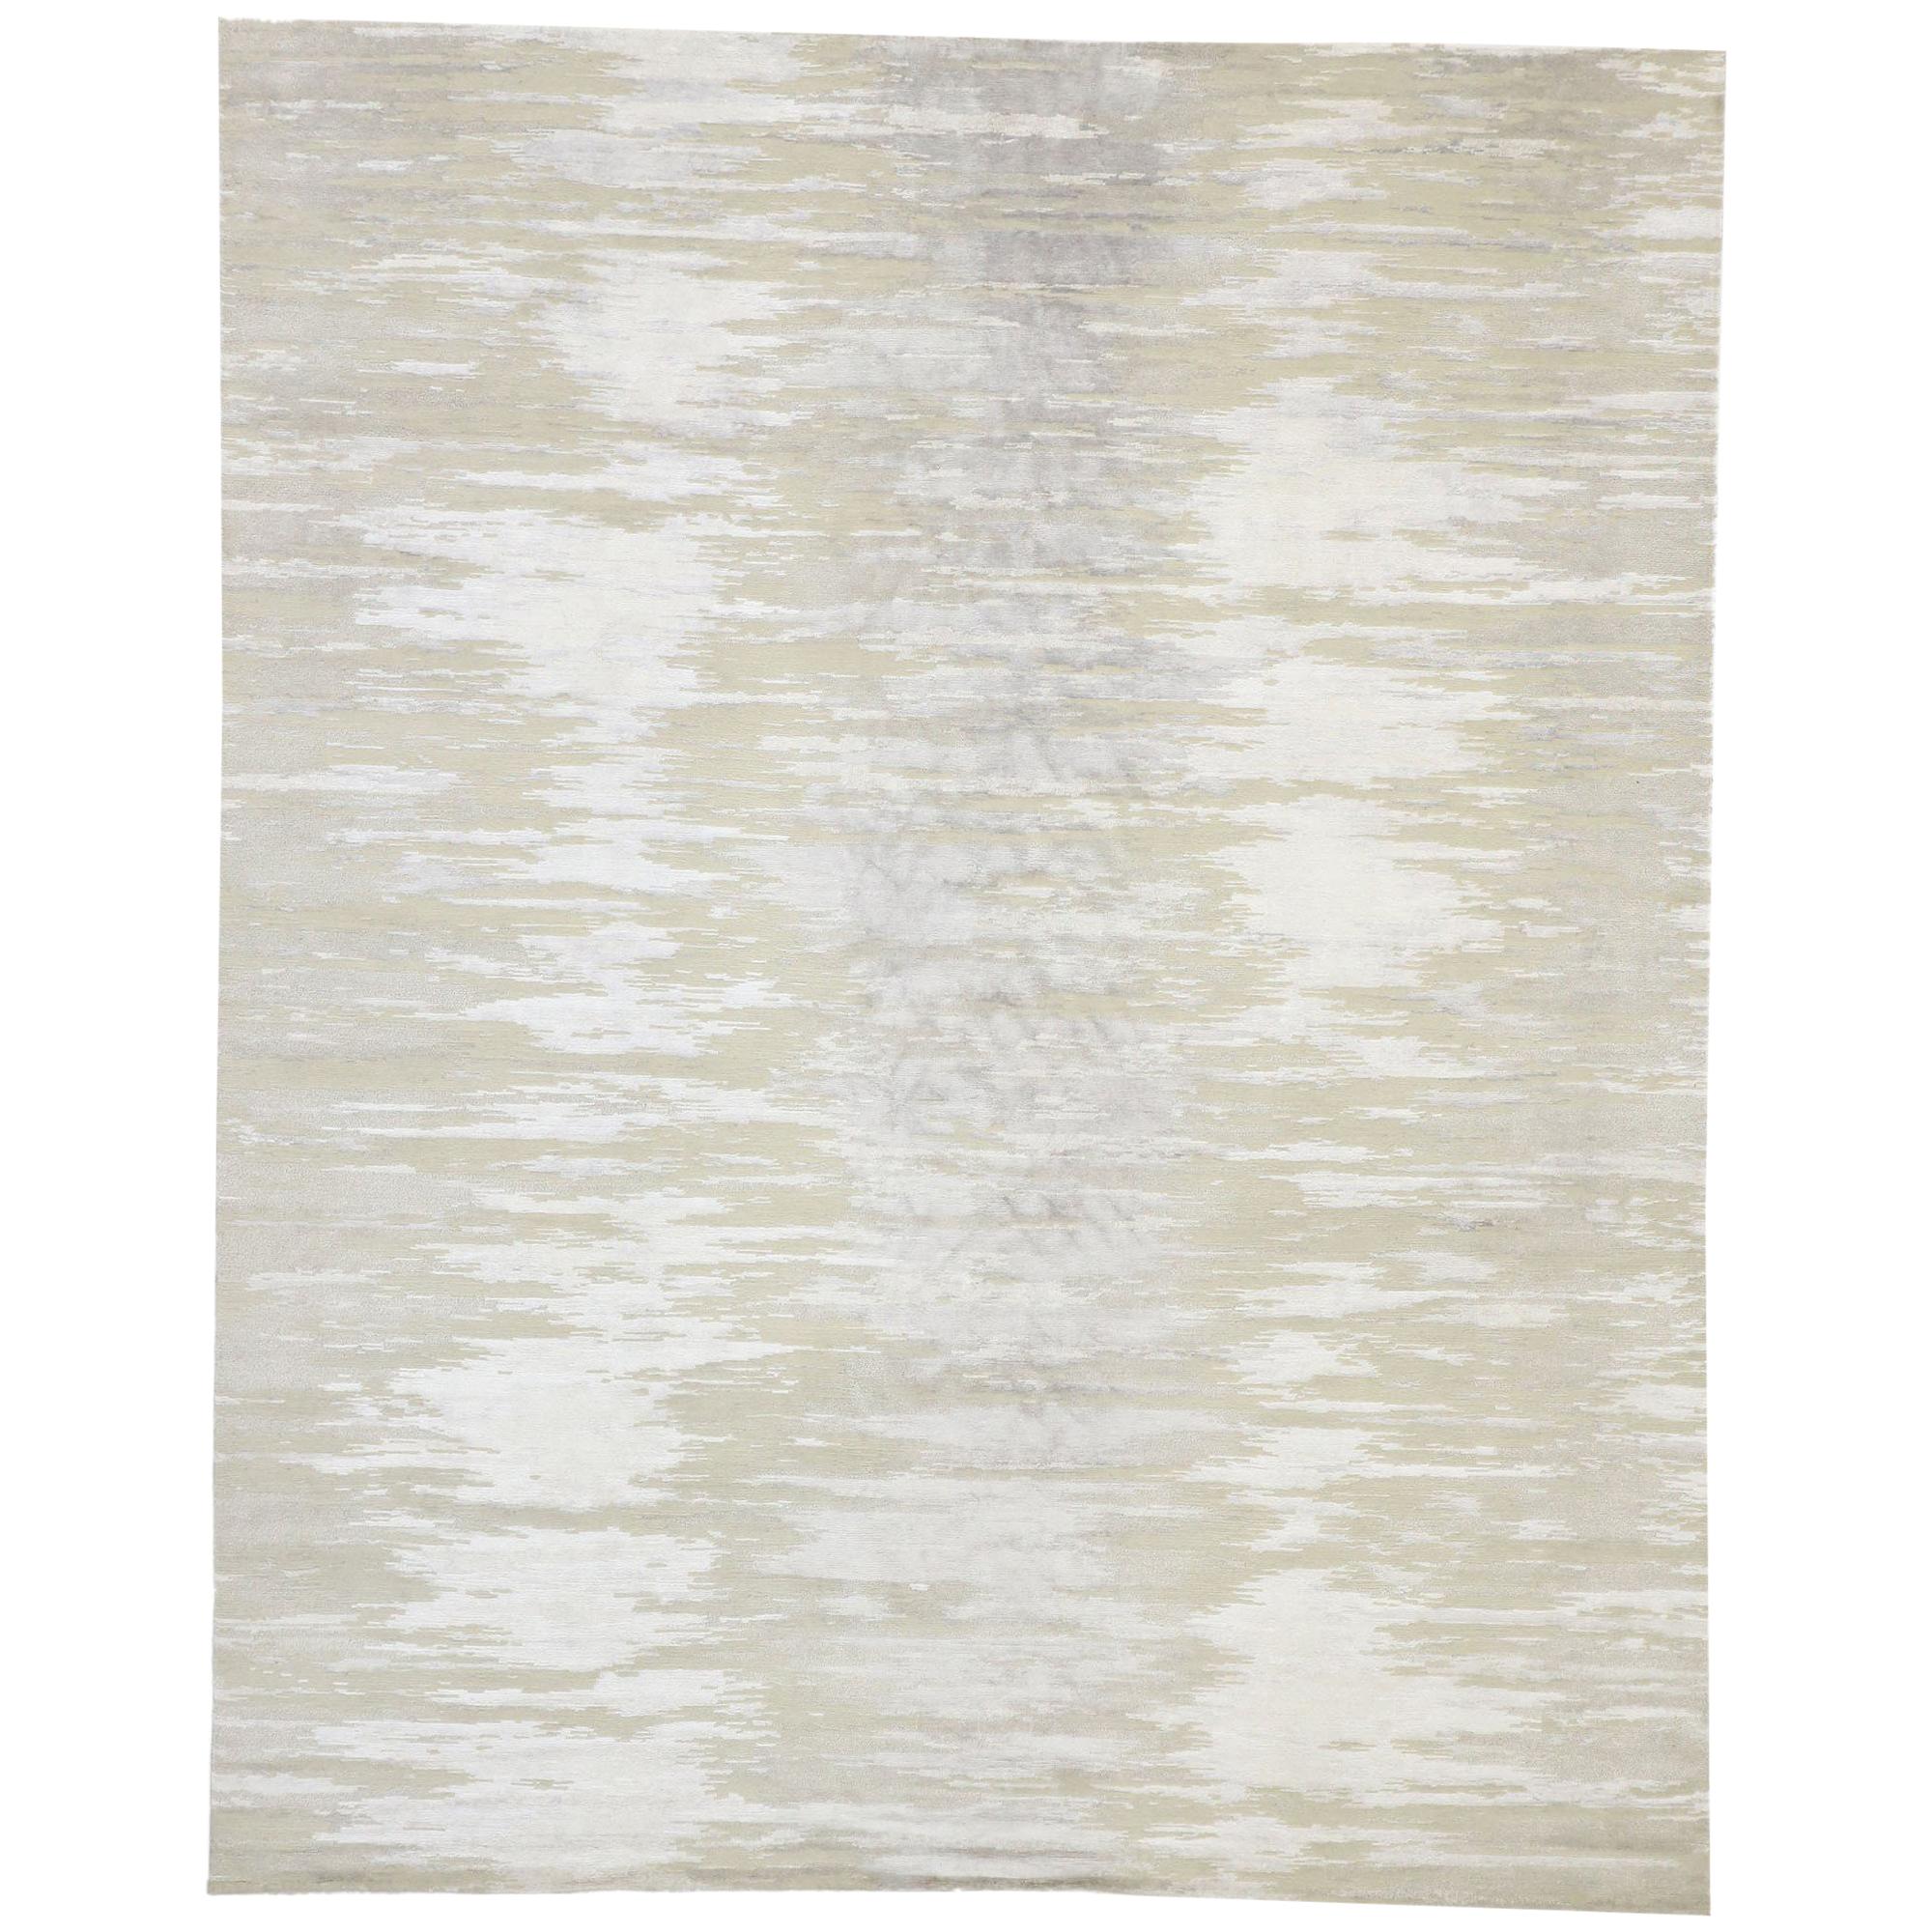 New Nordic Ombré Area Rug with Neutral Colors and Hygge Scandi Style For Sale